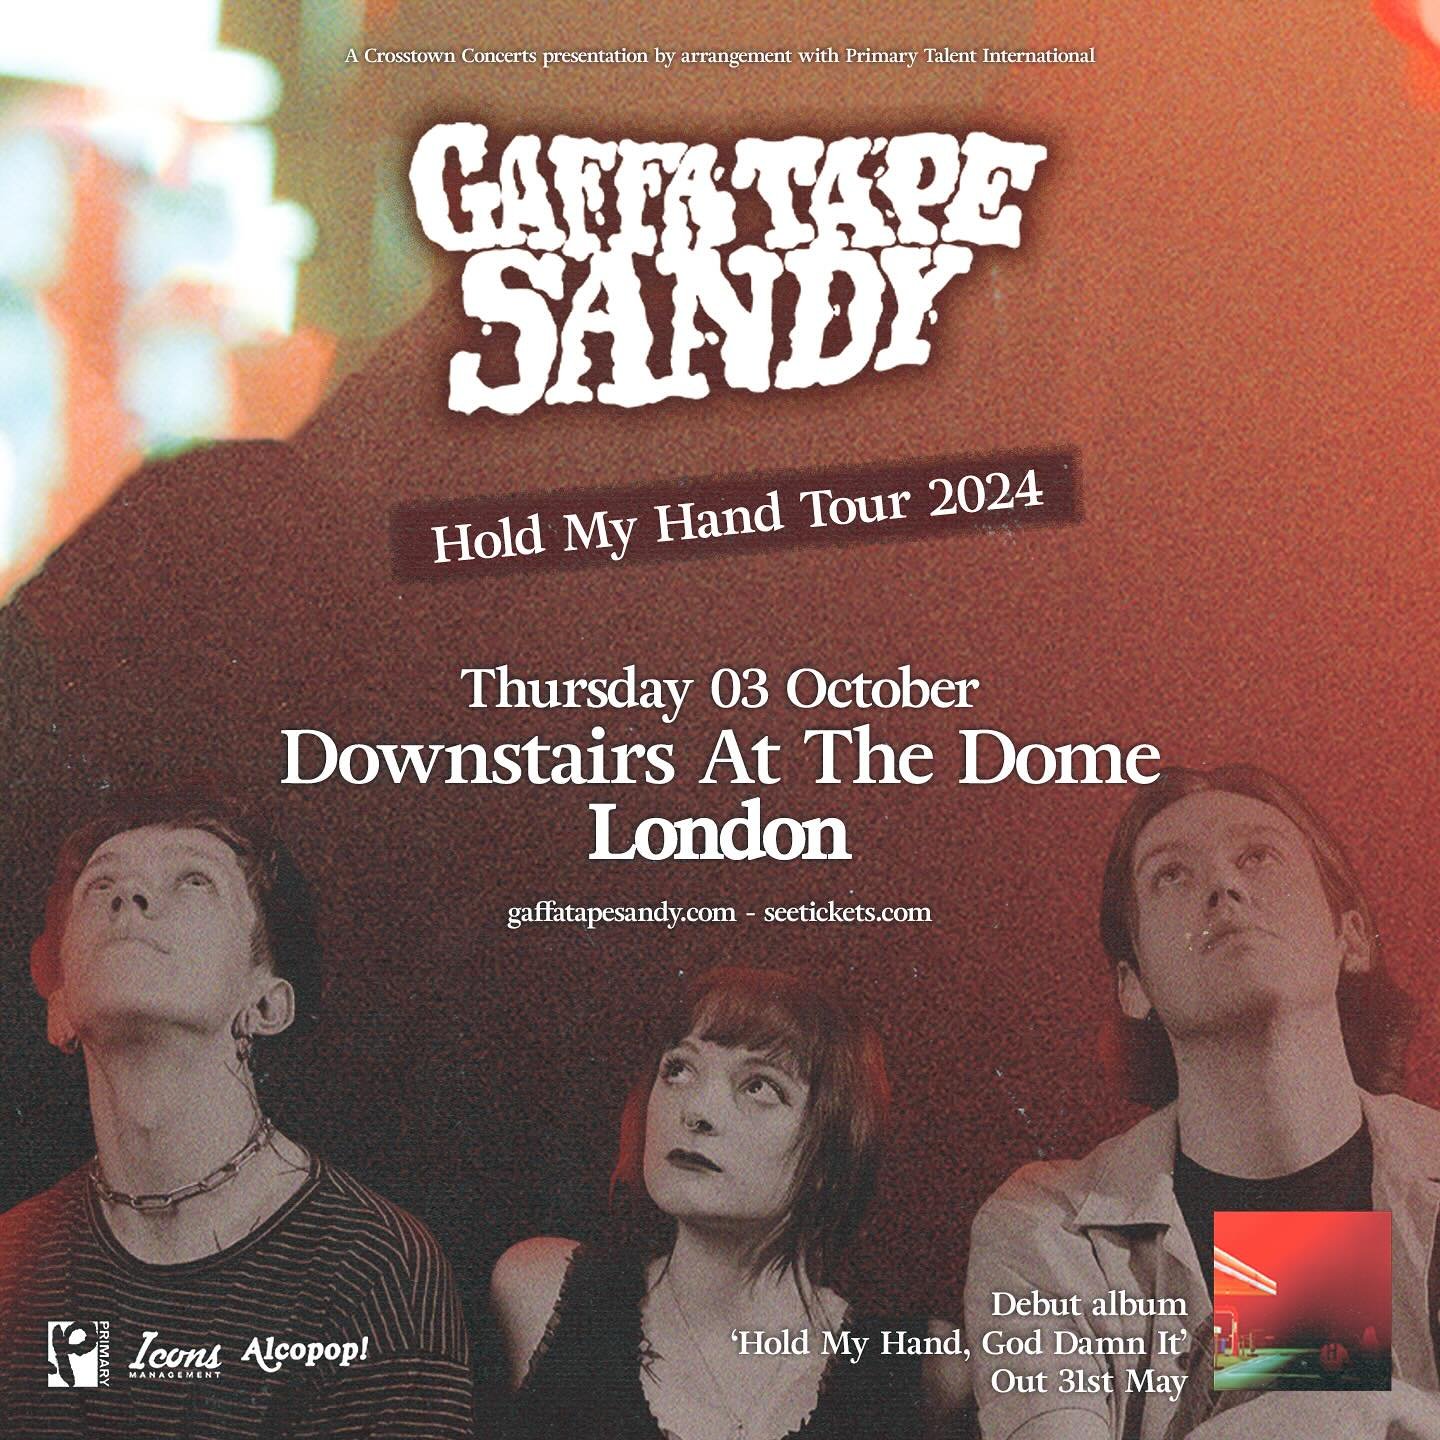 &ldquo;Thrilling slices of punk rock, interlaced with killer melodies that most bands would be dying for&rdquo; &ndash; NME

@gaffatapesandy headline Downstairs At @thedomelondon on October 3rd.

The band&rsquo;s debut album Hold My Hand, God Damn It